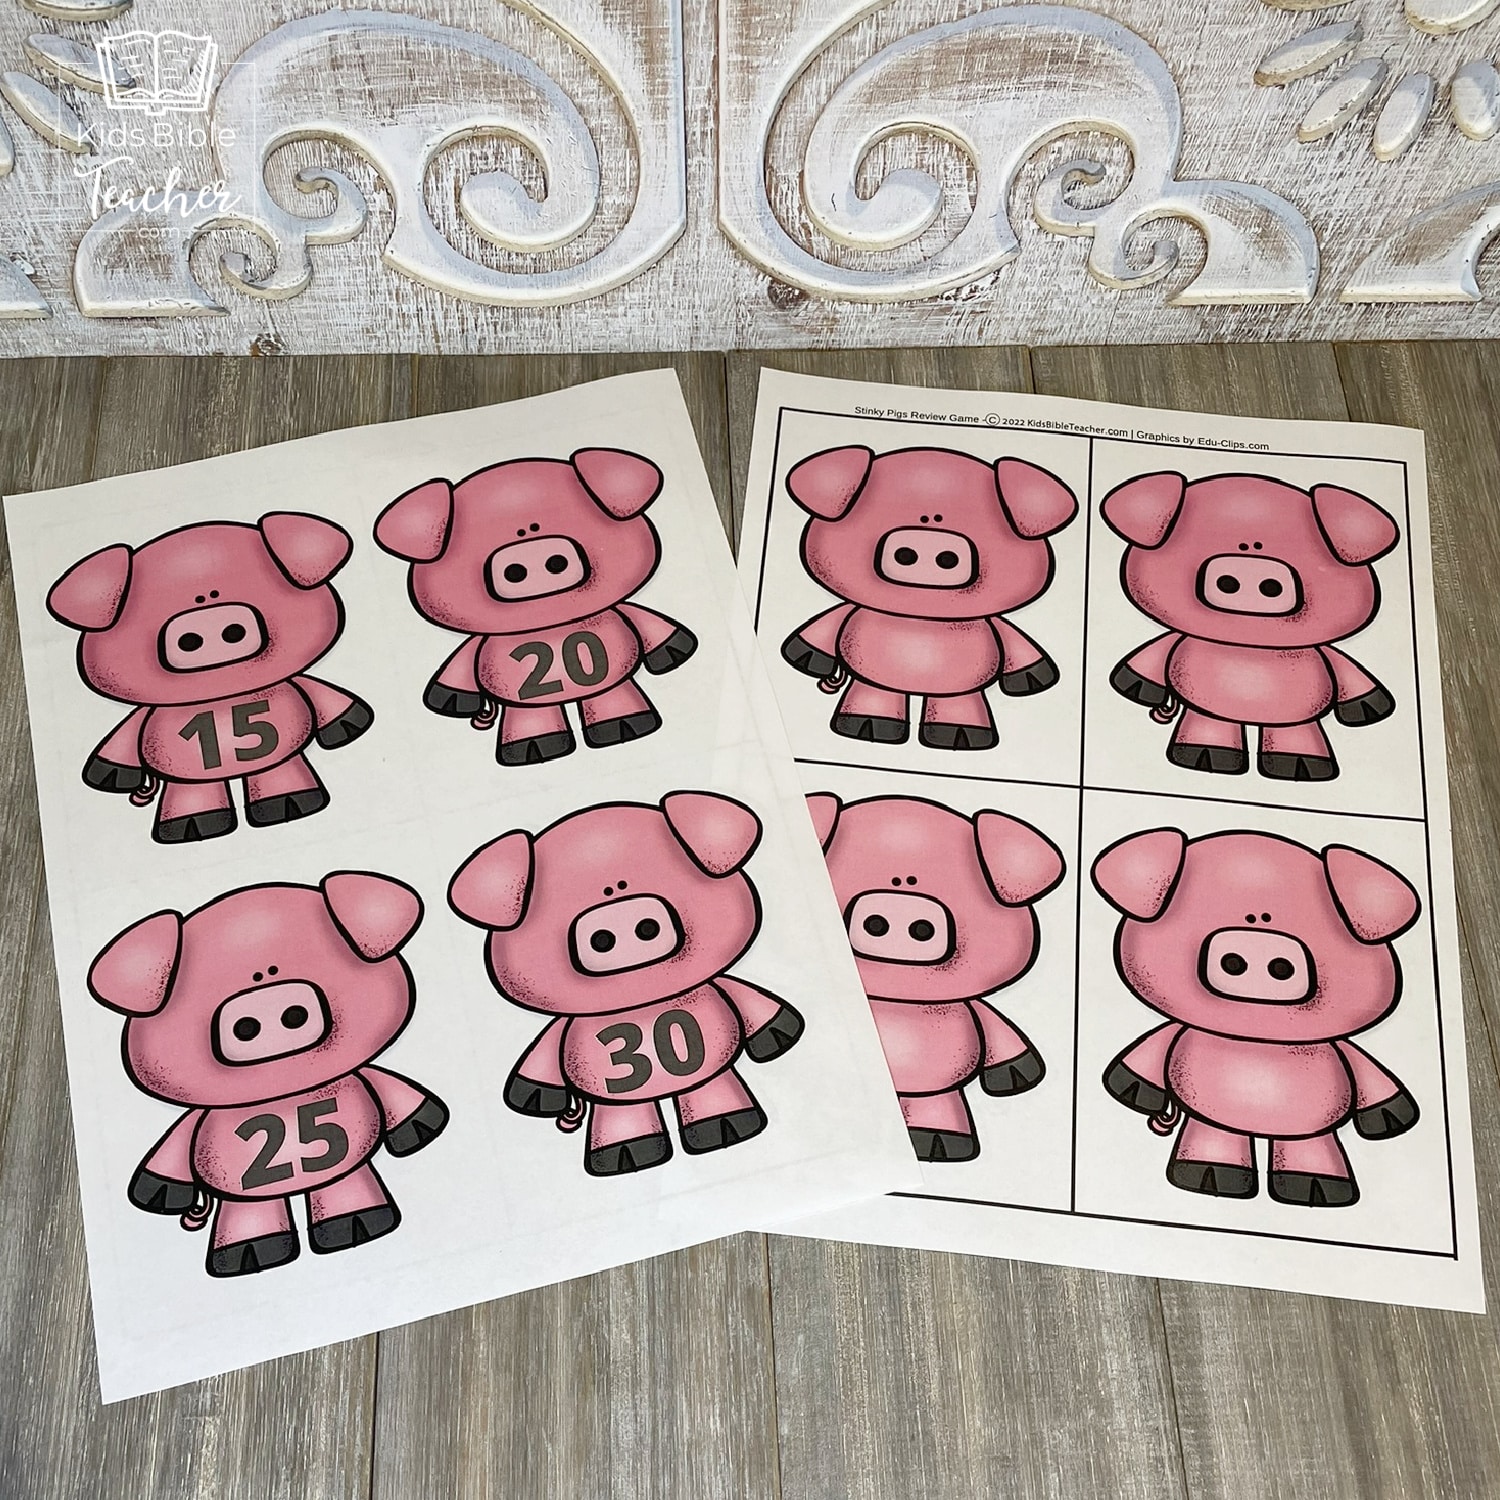 Picture of Stinky Pigs printable Bible Lesson Review Game Cards printed out